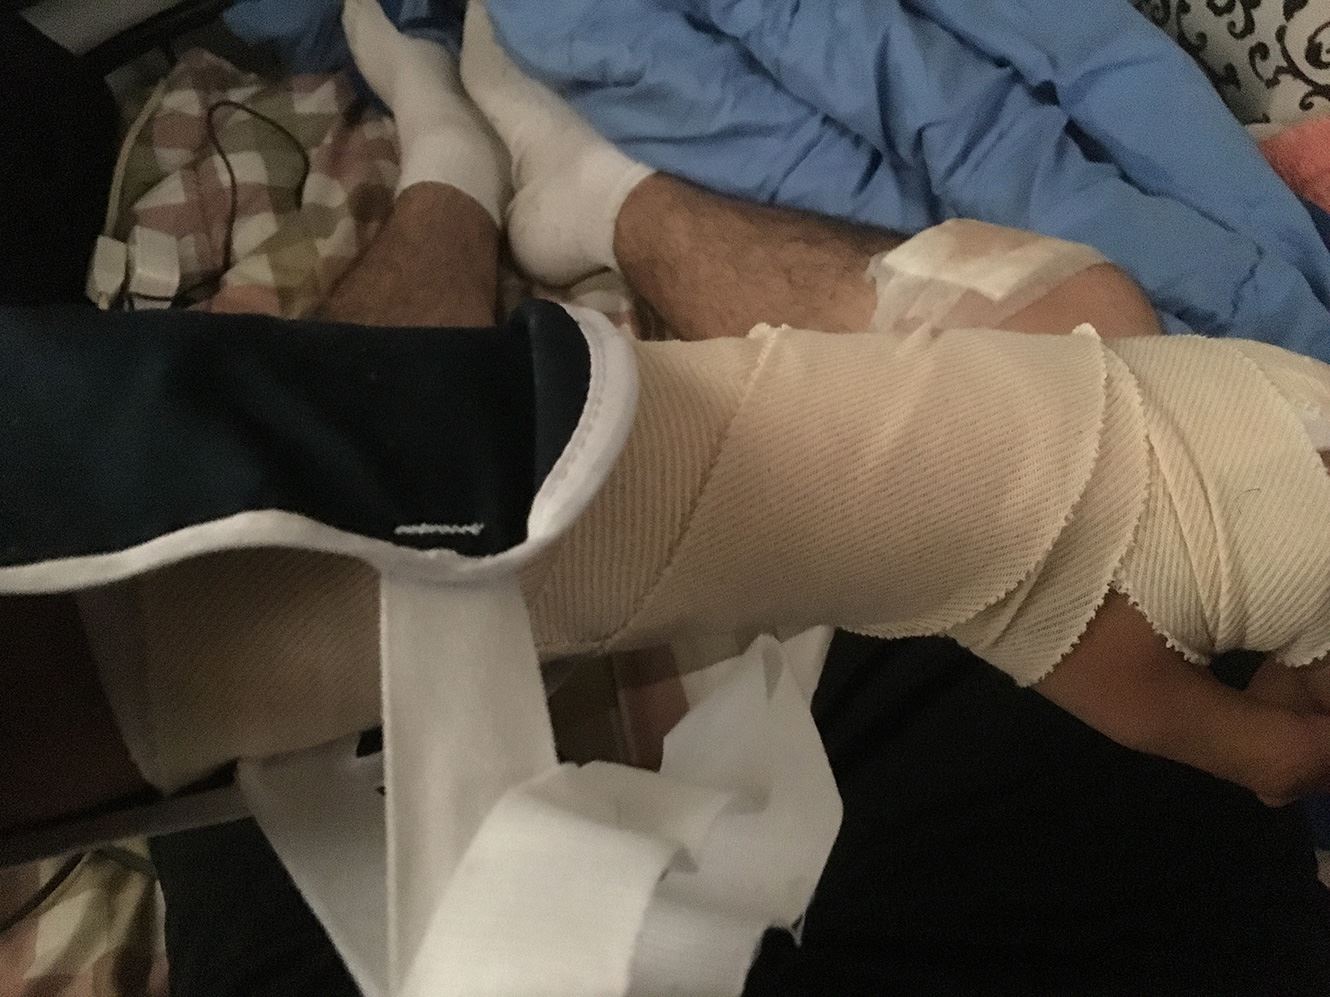 Broken arm from Lyft scooter accident